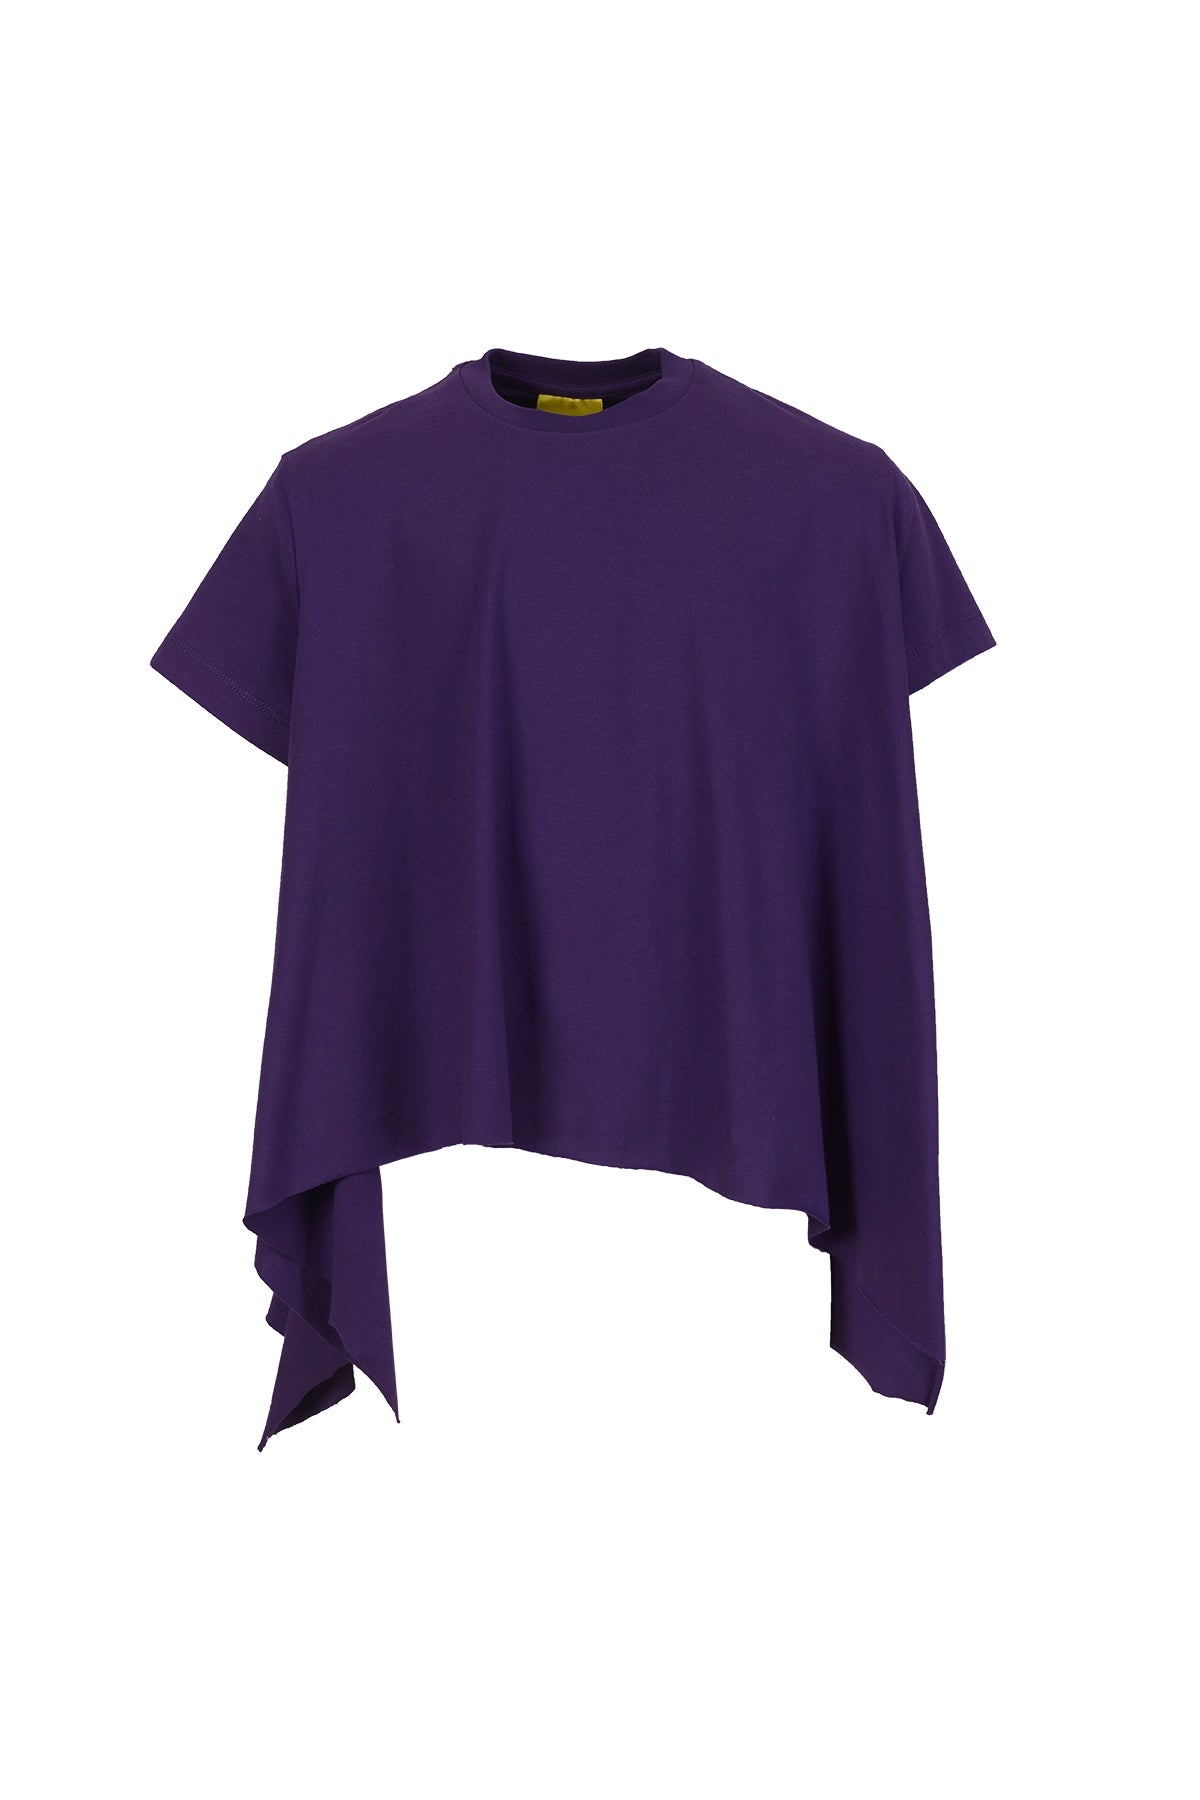 PURPLE T-SHIRT WITH SIDE FLAPS